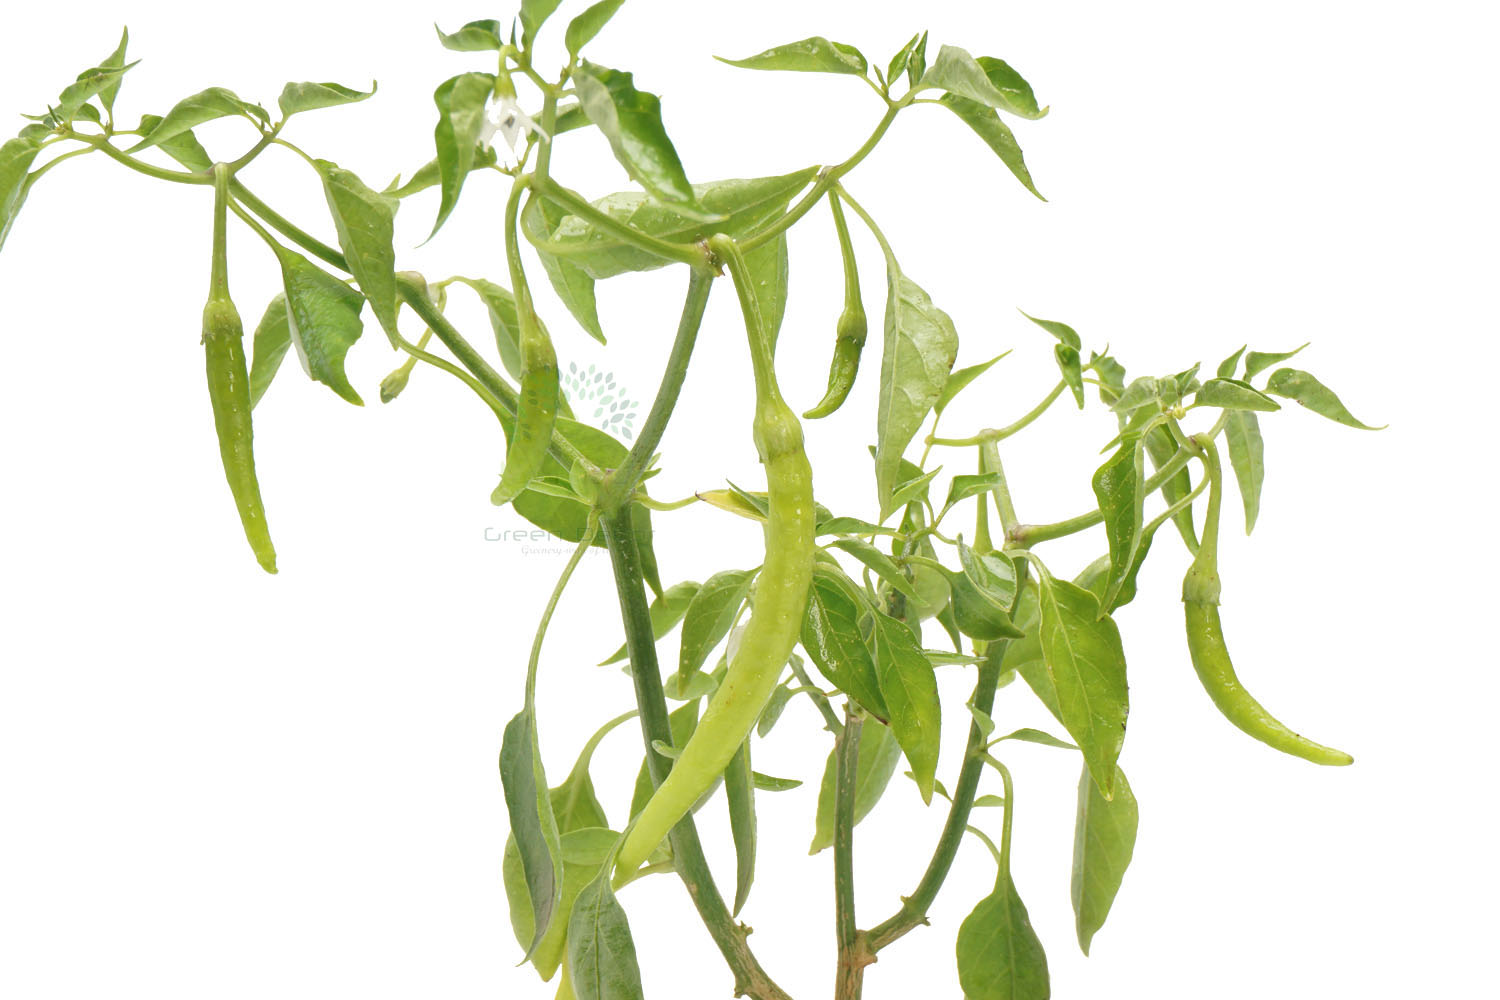 Buy Chilli Green Plants , White Pots and seeds in Delhi NCR by the best online nursery shop Greendecor.